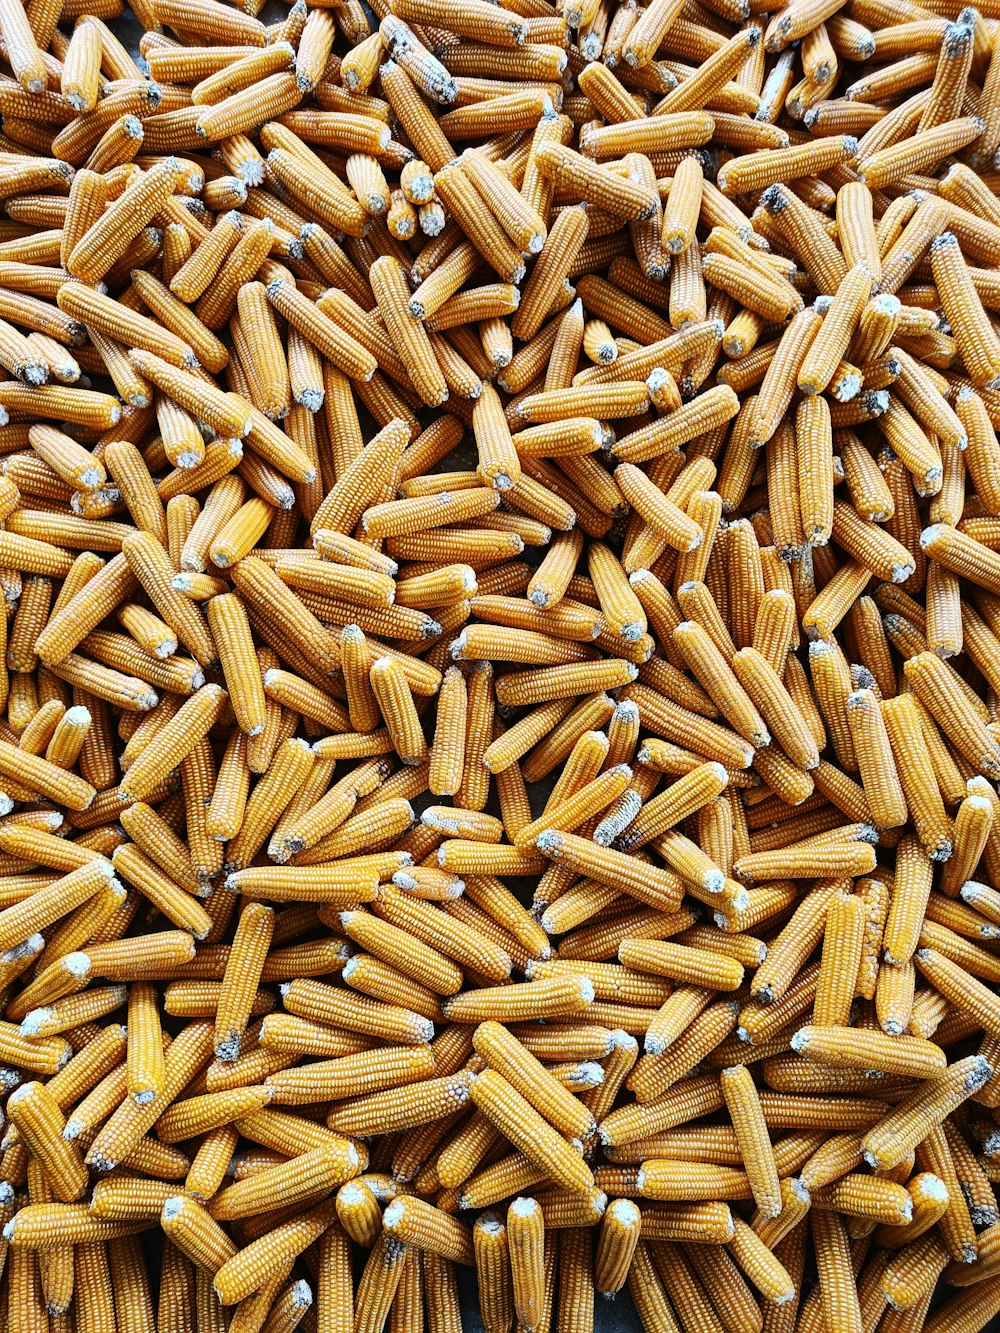 a large pile of corn is shown in this image